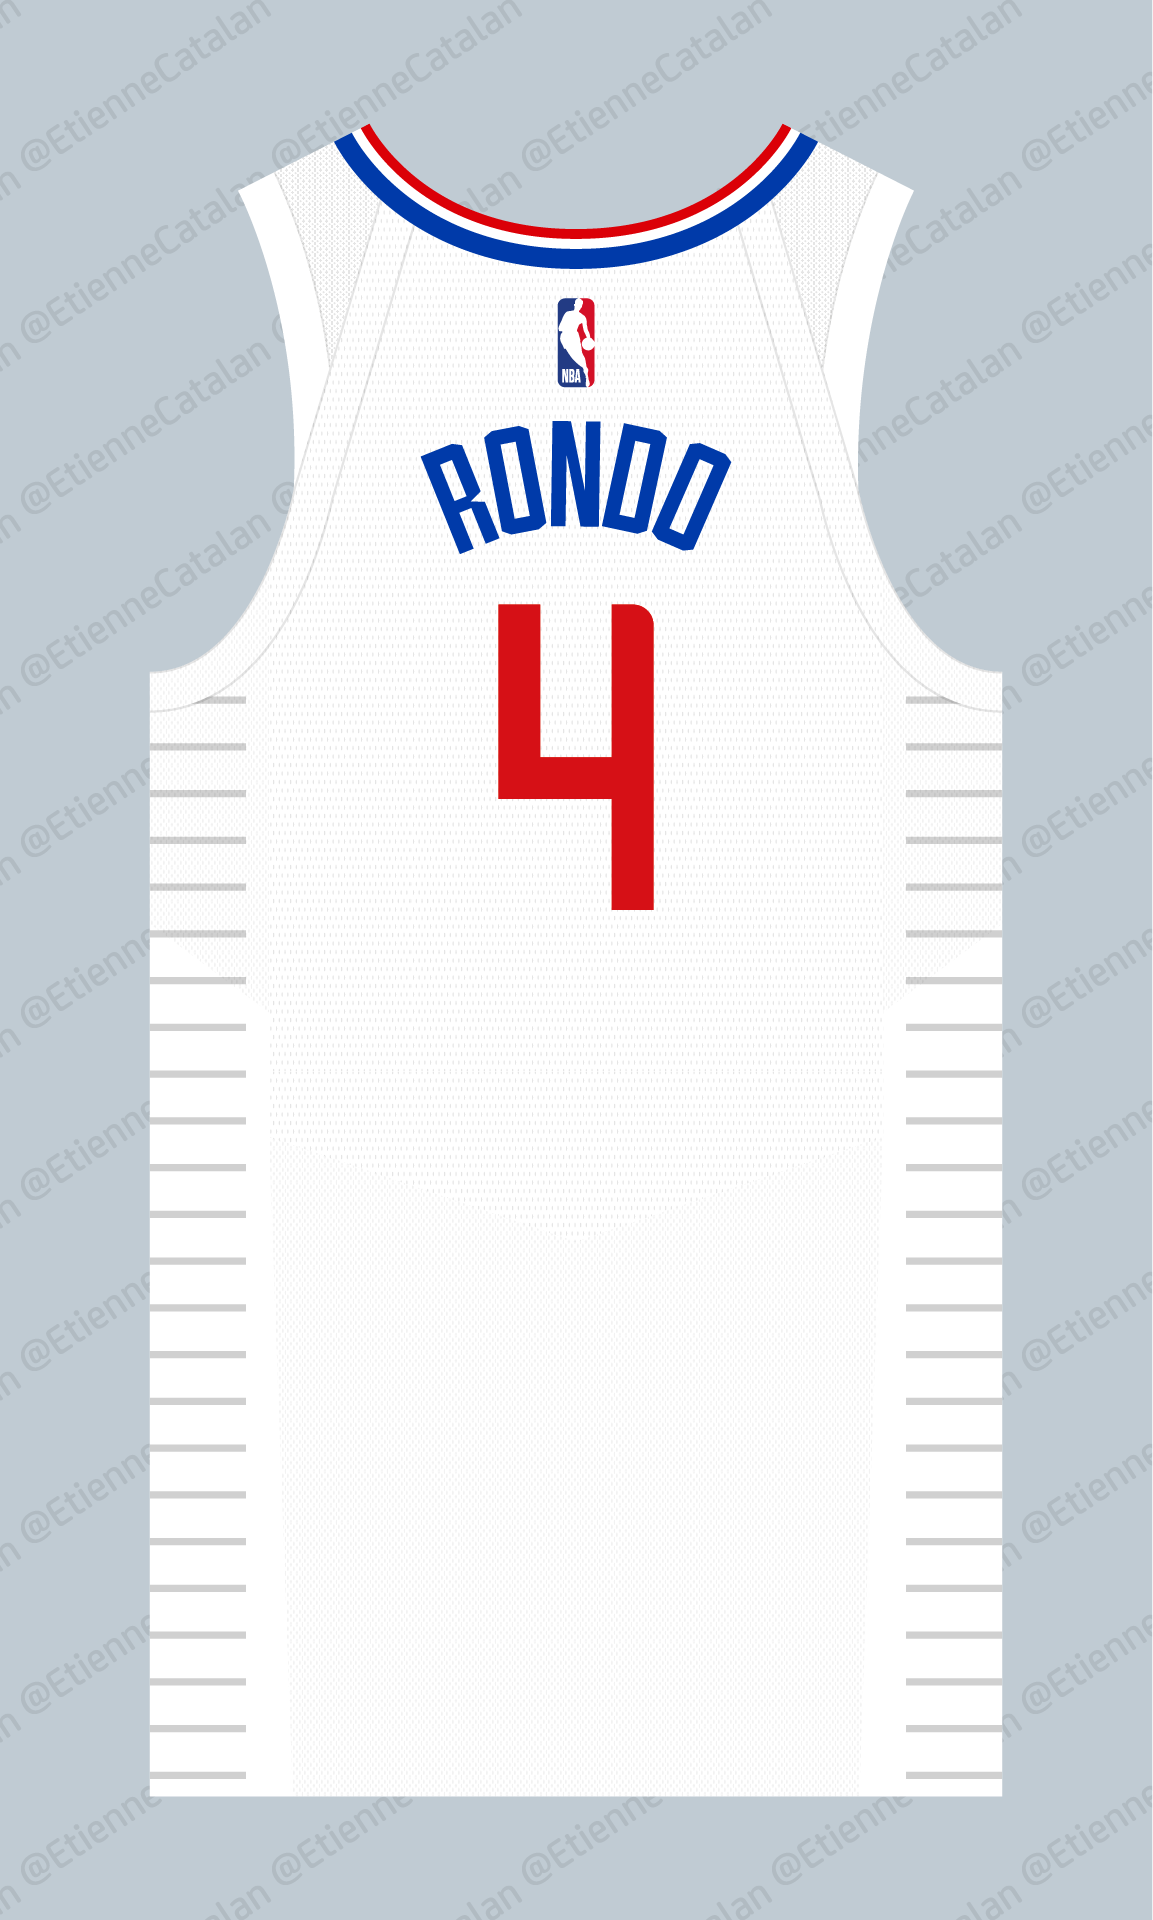 Etienne Catalan on X: Rajon Rondo (@RajonRondo) will wear No. 4 for the # Lakers. #NBA @UniWatch His number in Kentucky.  / X